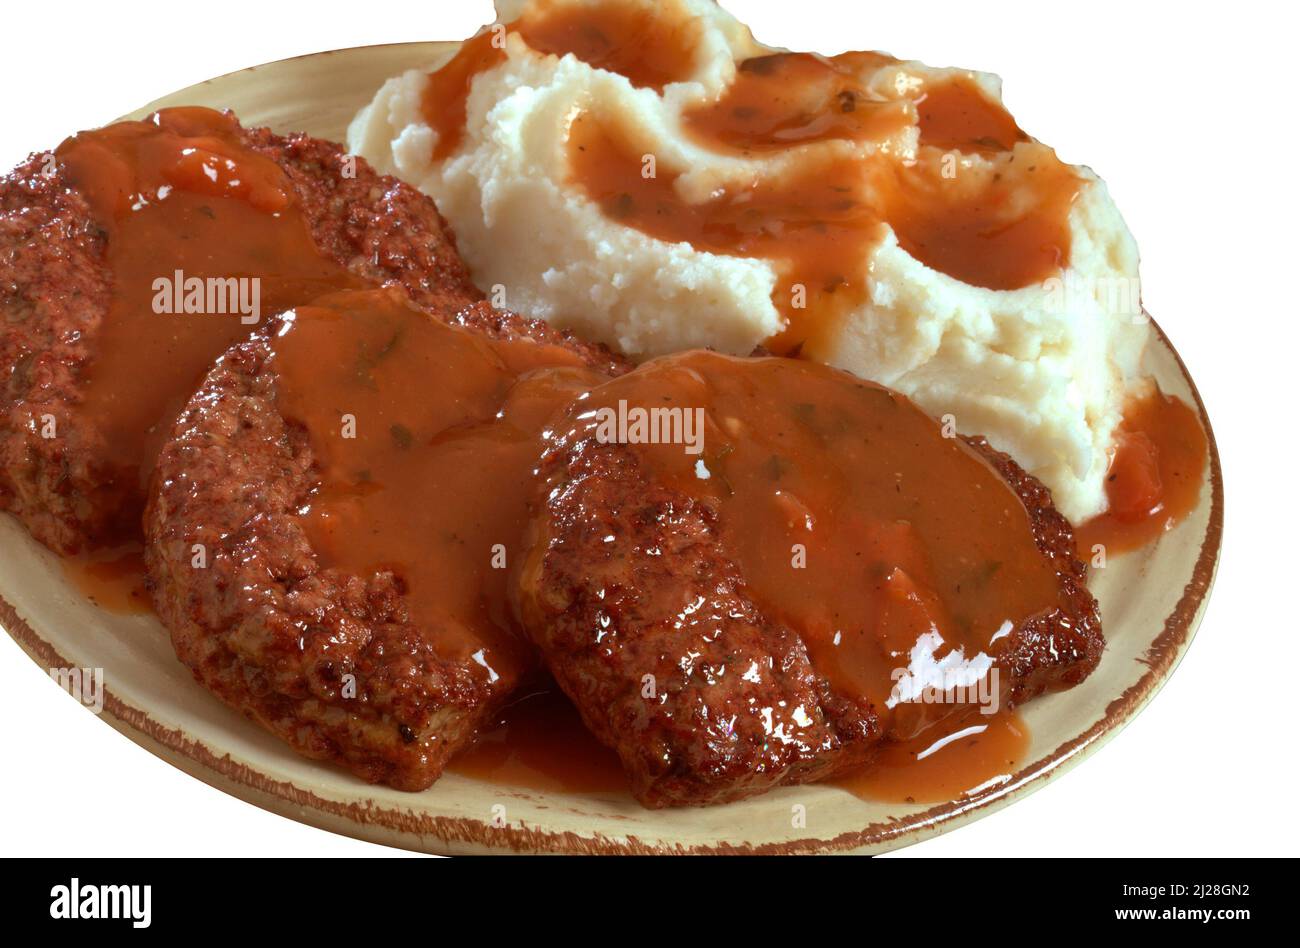 Meatloaf and Potato plate Stock Photo